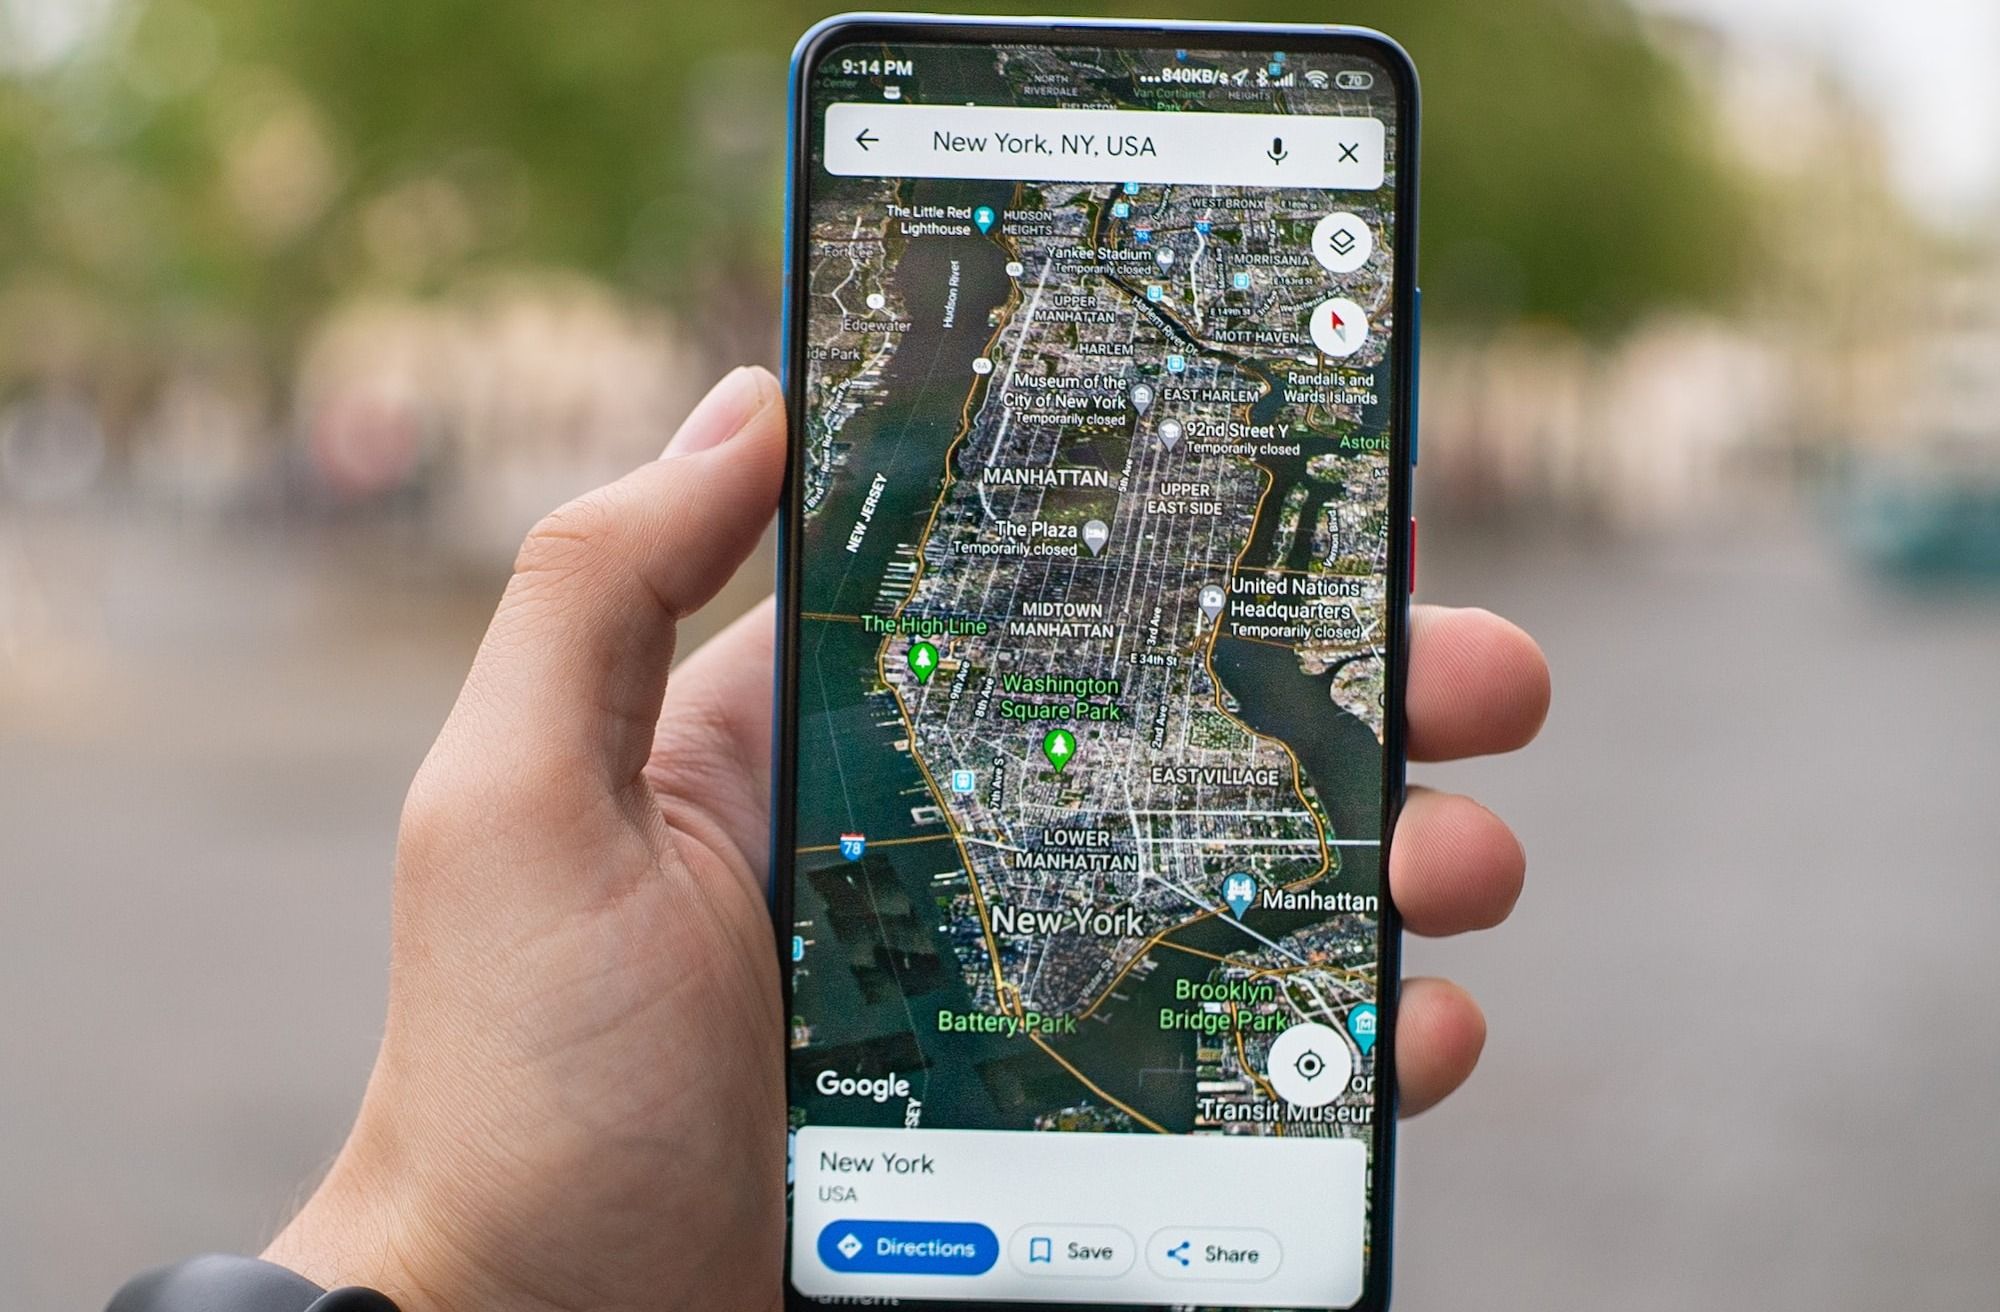 How to Share Your Location Using Google Maps